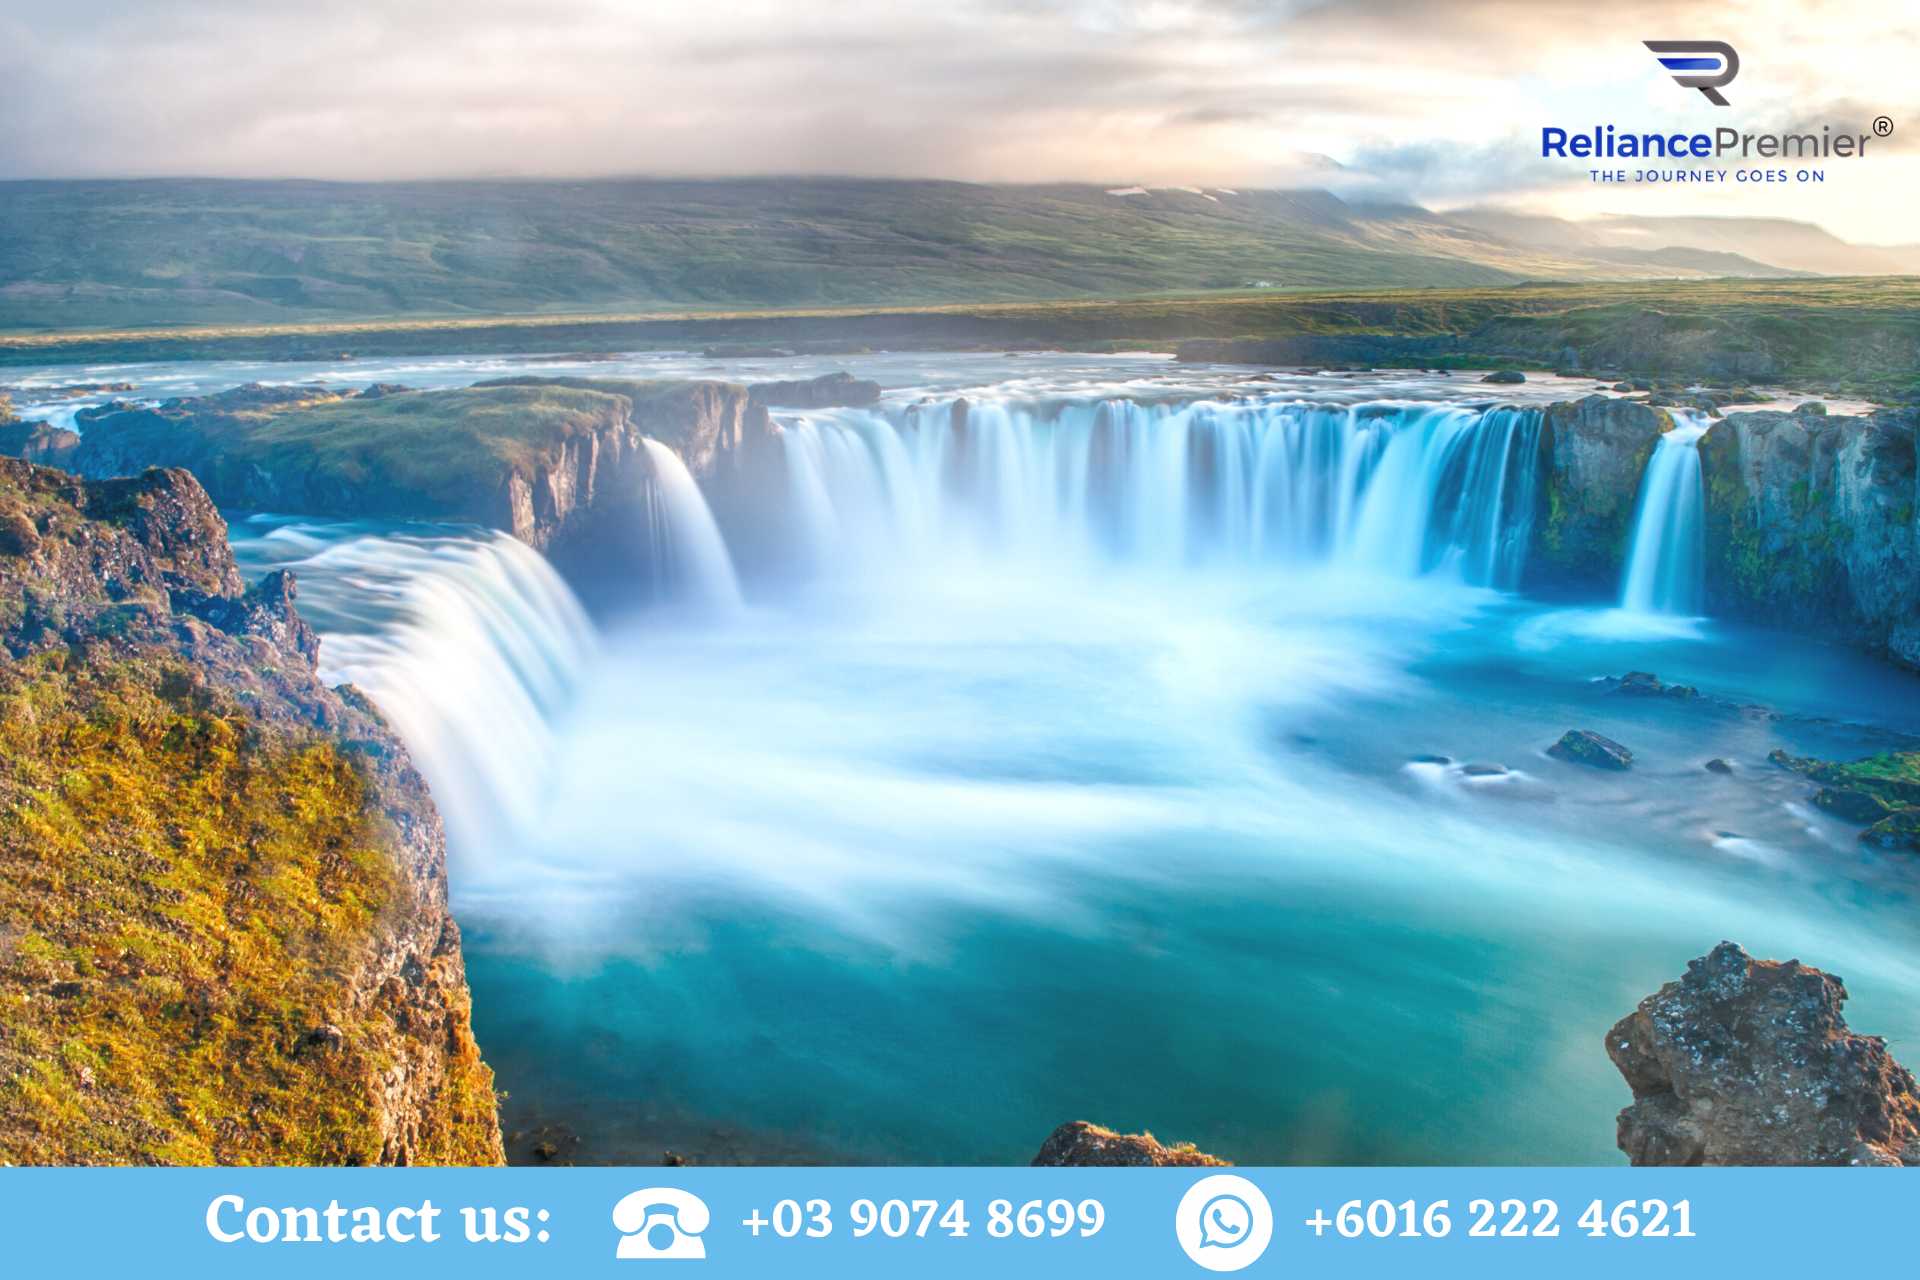 escorted tours to iceland from uk